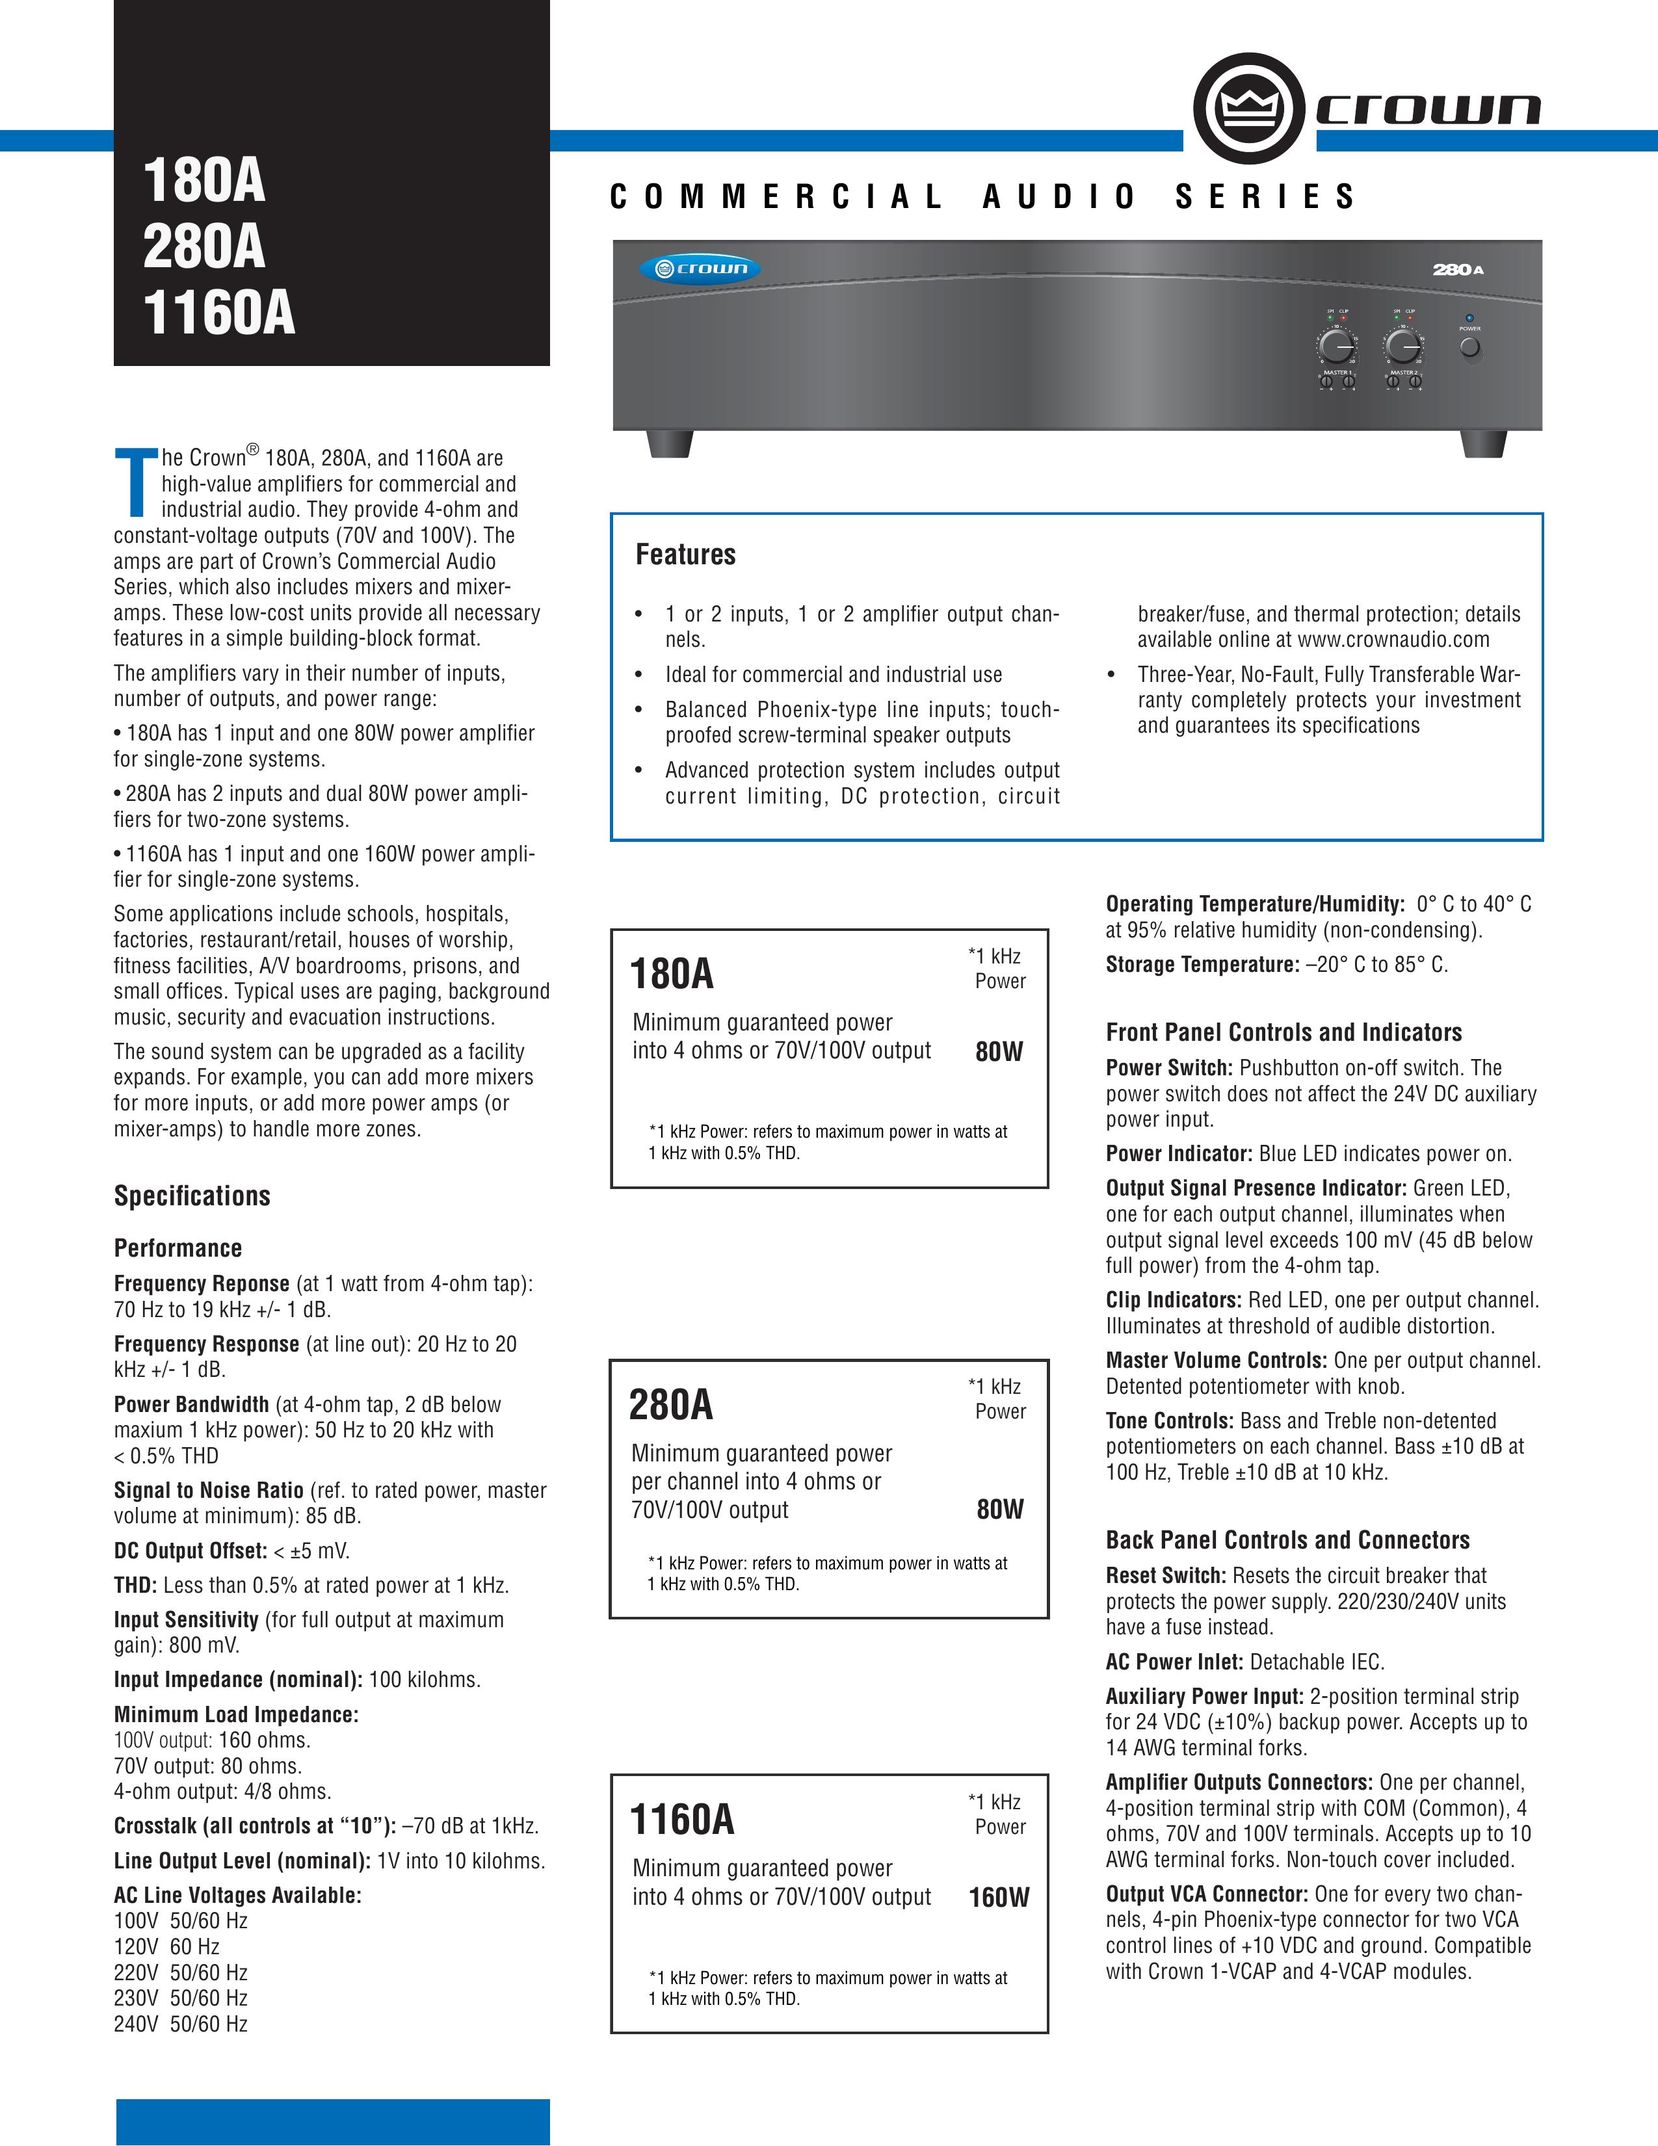 Crown Audio 280A Stereo Amplifier User Manual